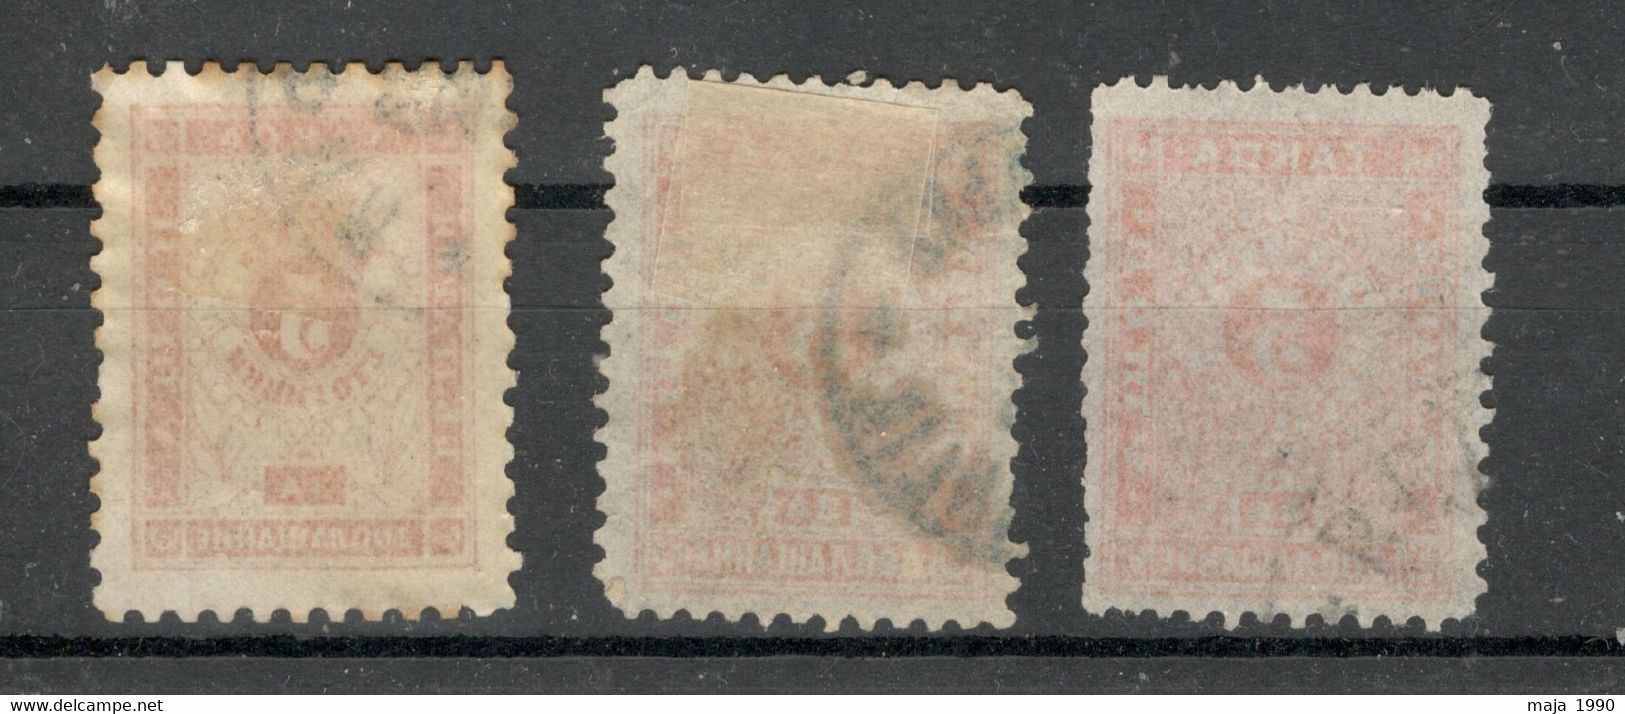 BULGARIA - 3 USED  POSTAGE DUE STAMPS, 5st - VARIETY - 1887/1895. - Portomarken